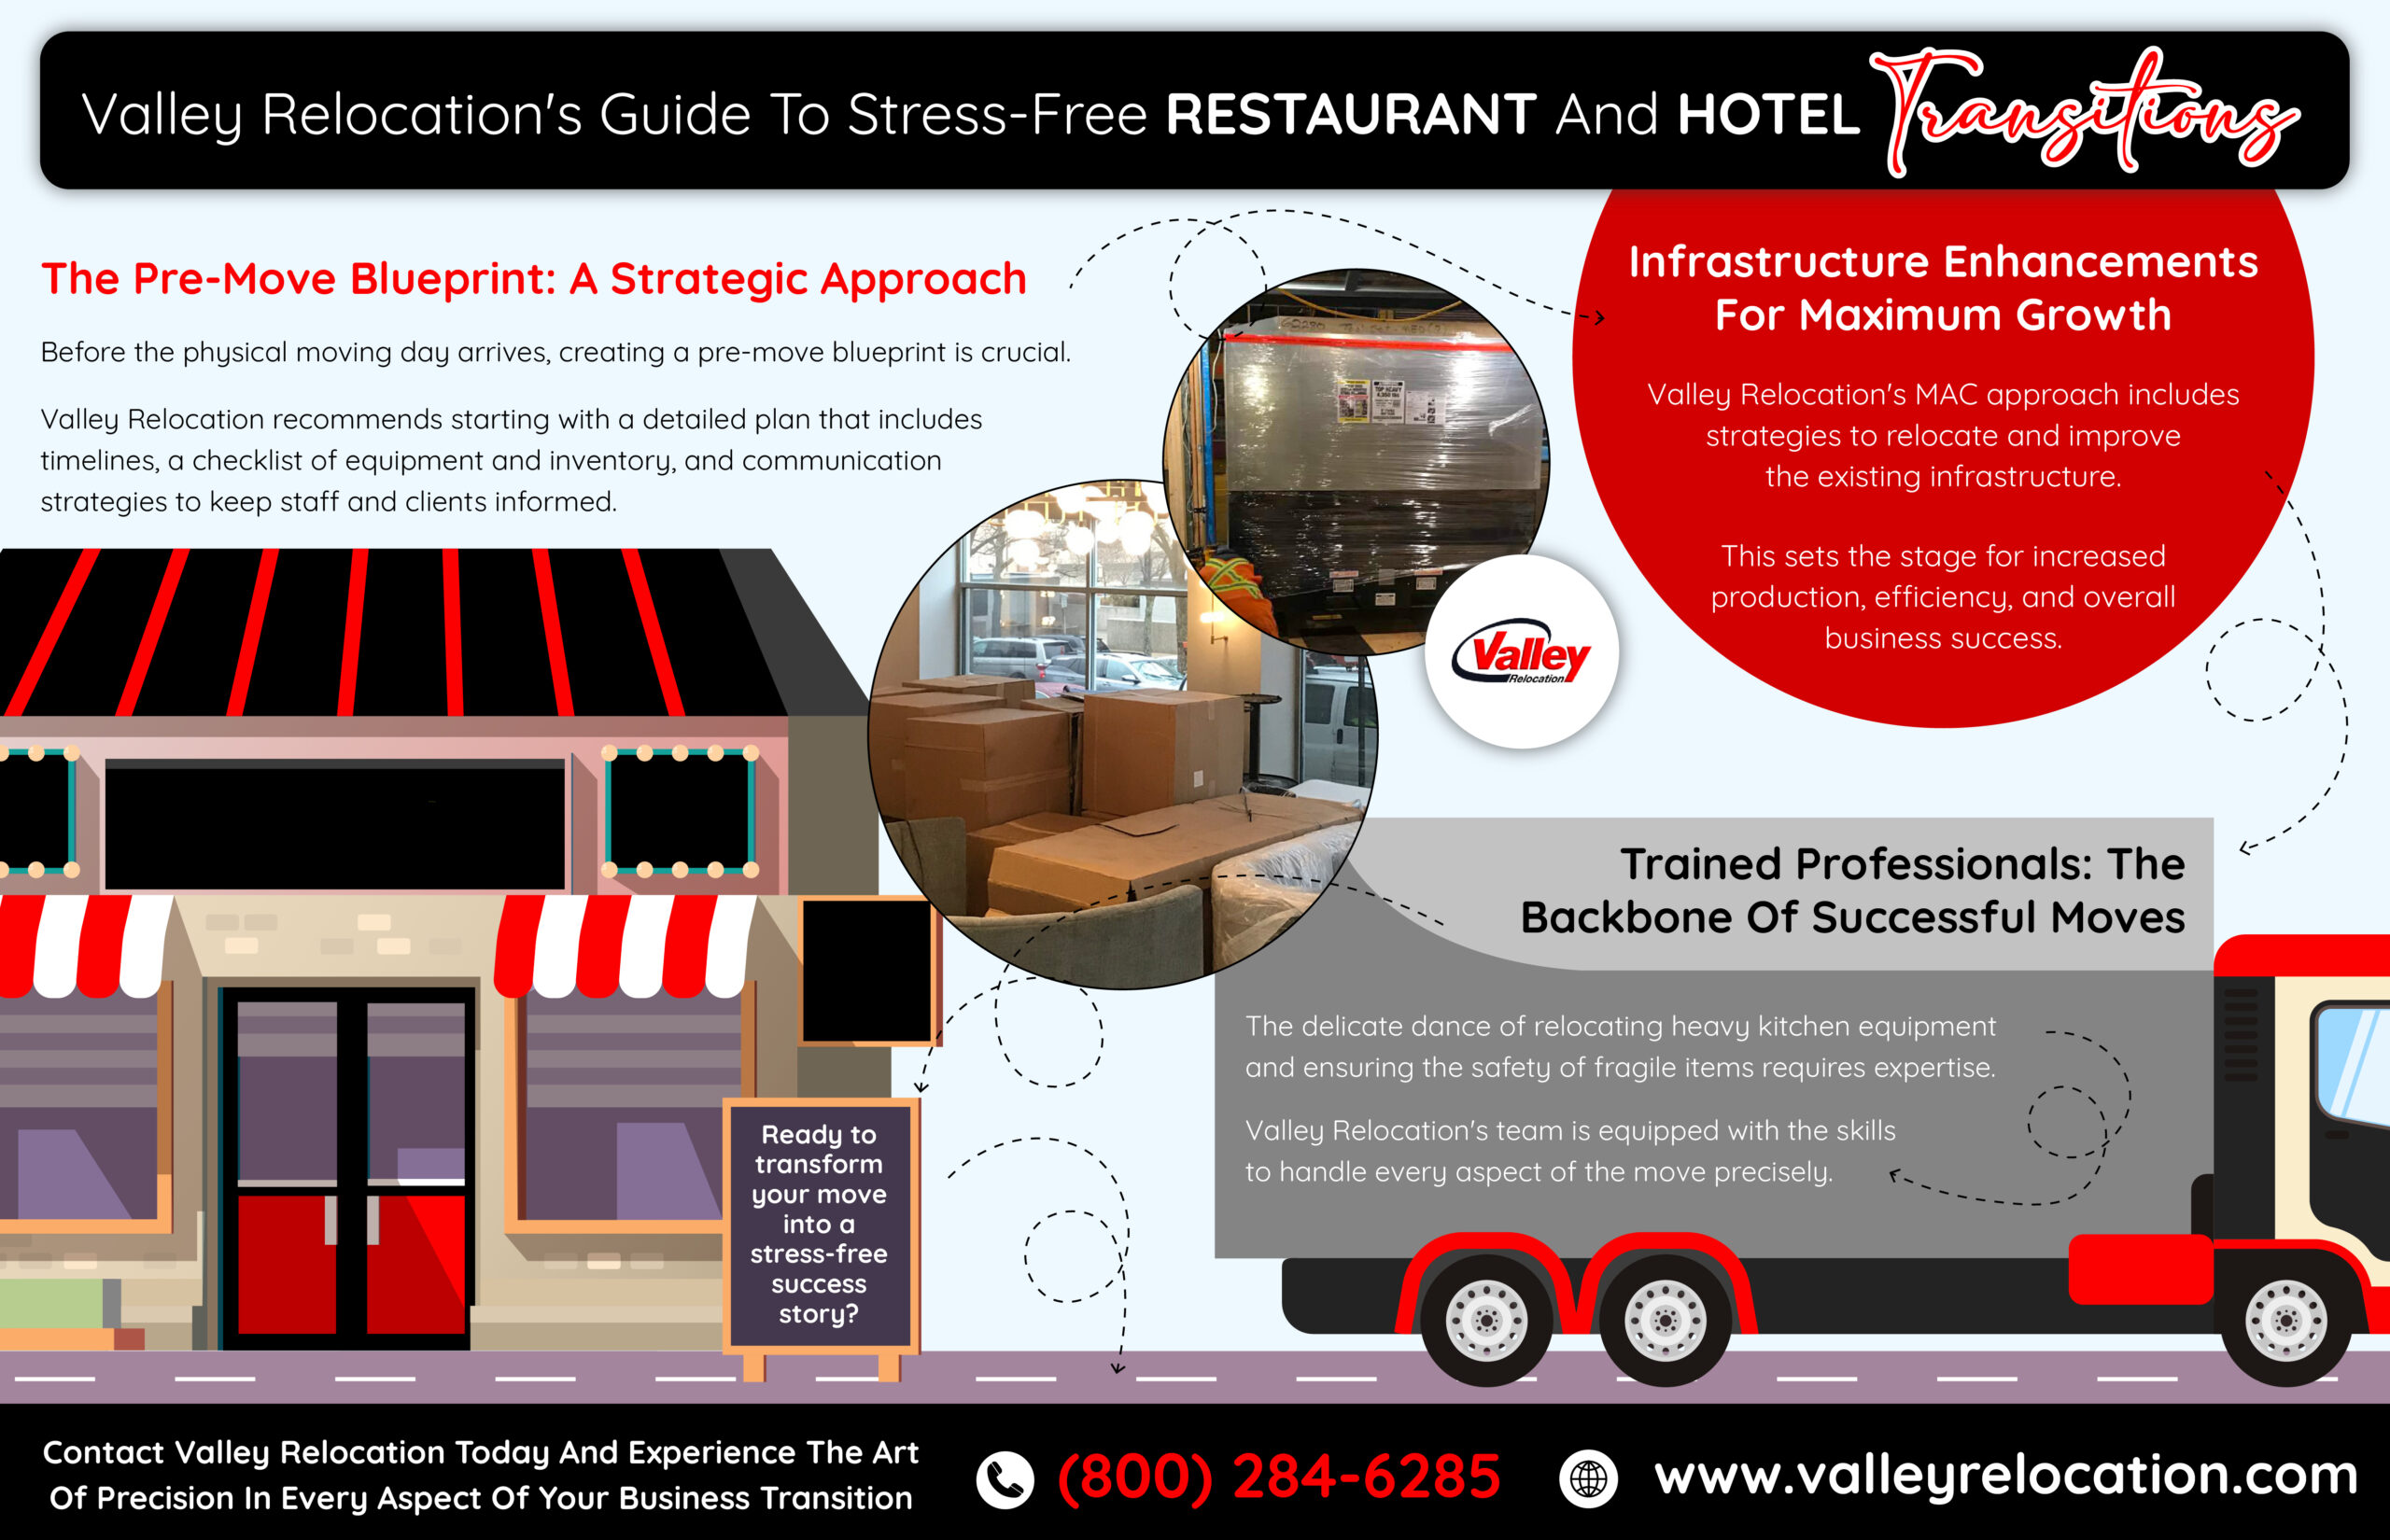 Valley Relocation's Guide To Stress-Free Restaurant And Hotel Transitions